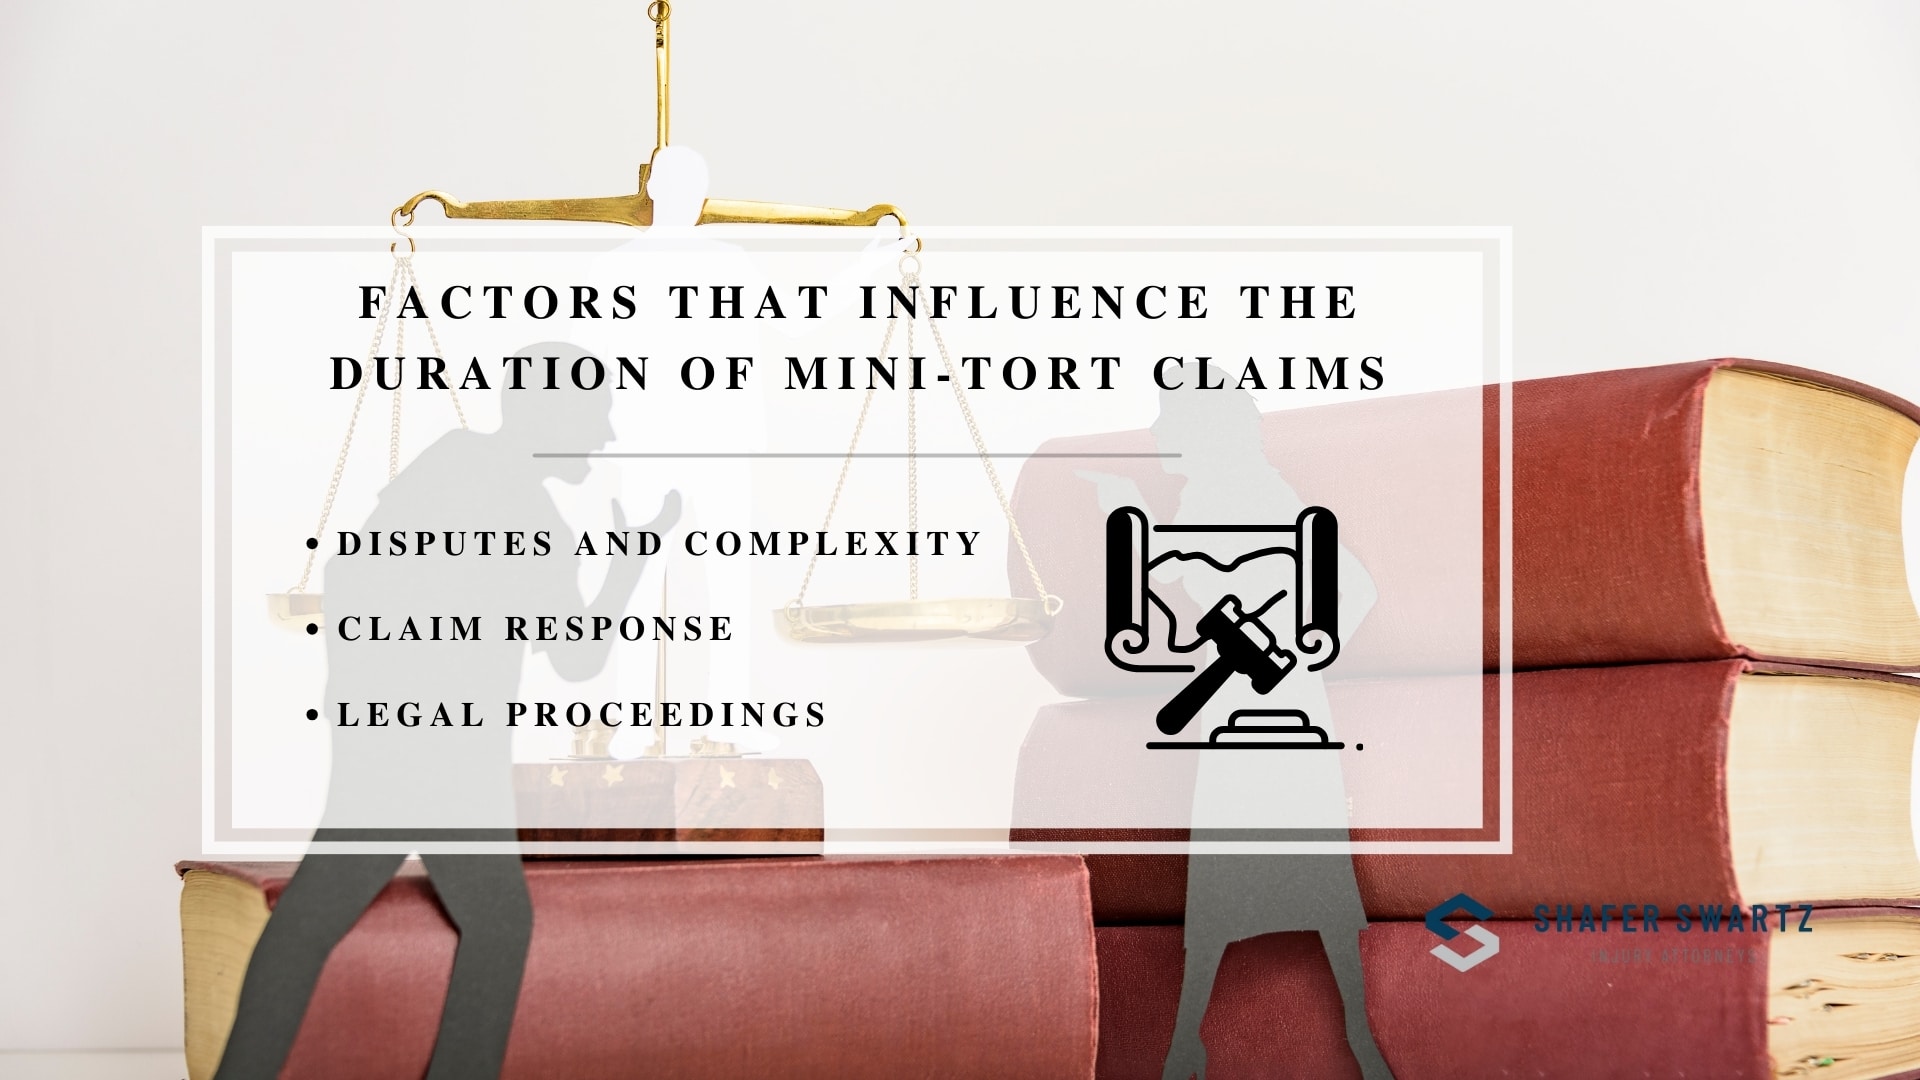 Infographic image of factors that influence the duration of mini-tort claims